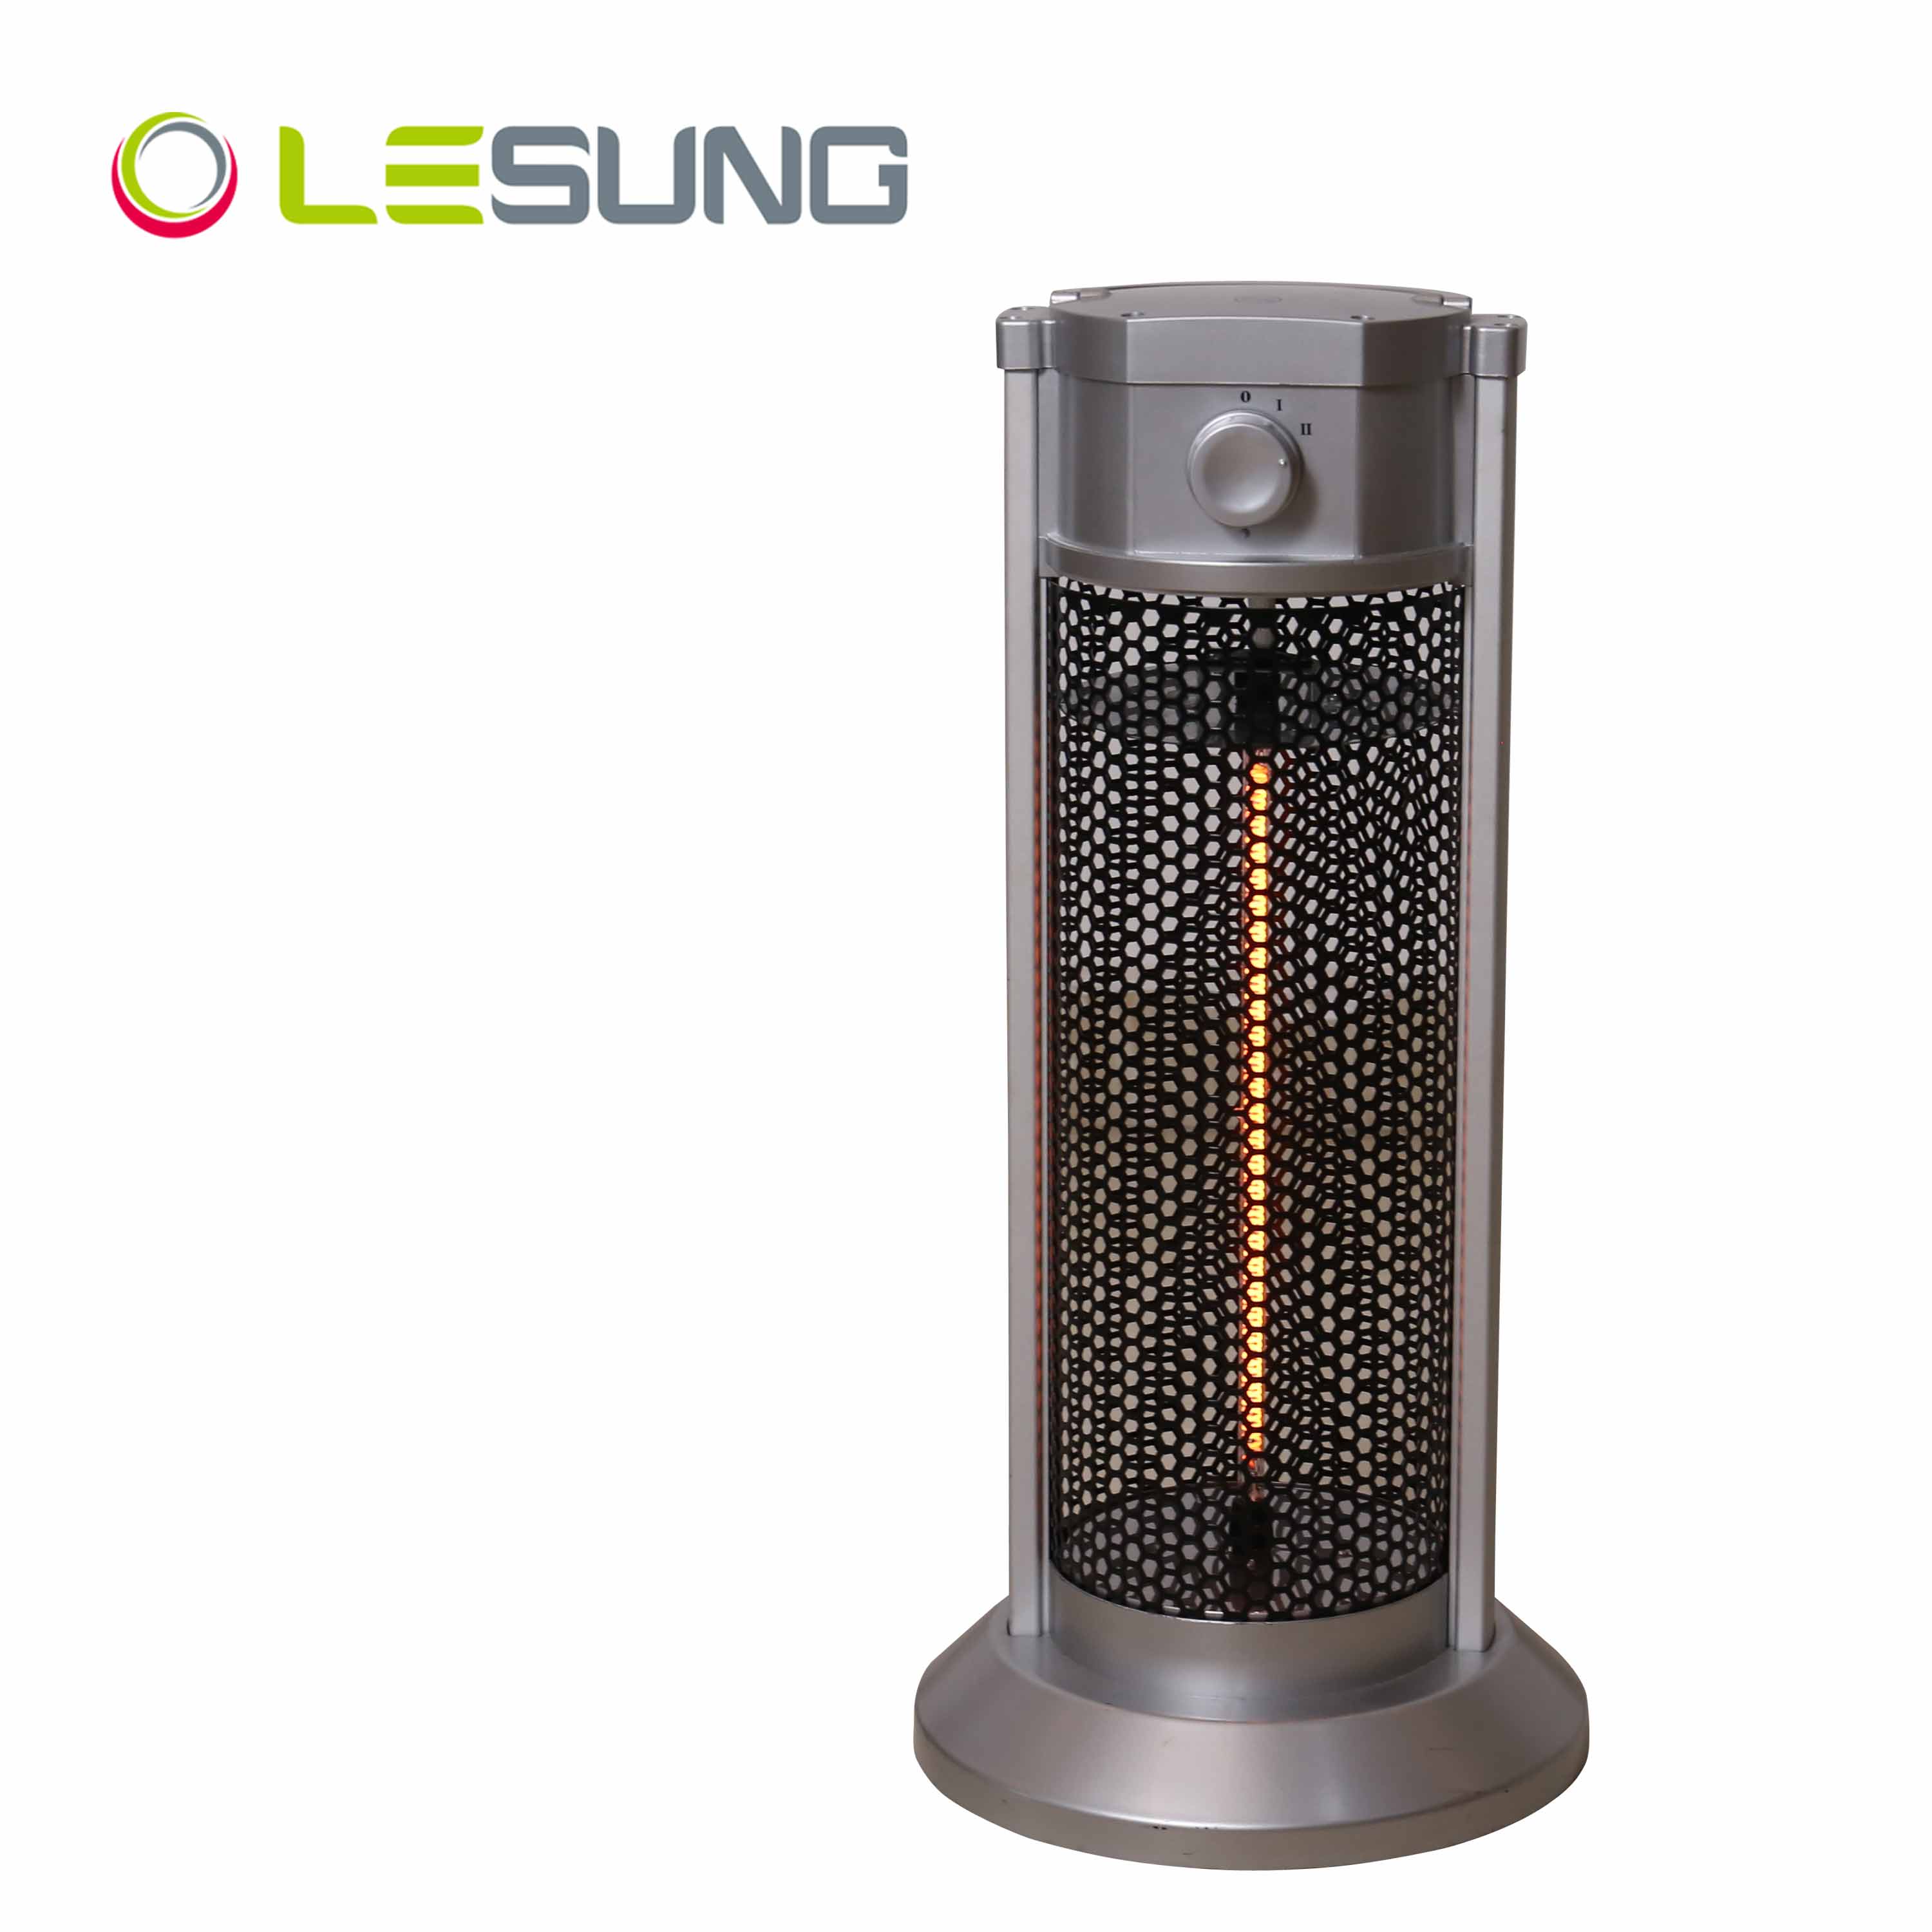 Cylindrical Freestanding Carbon Fiber Heater na may Handle